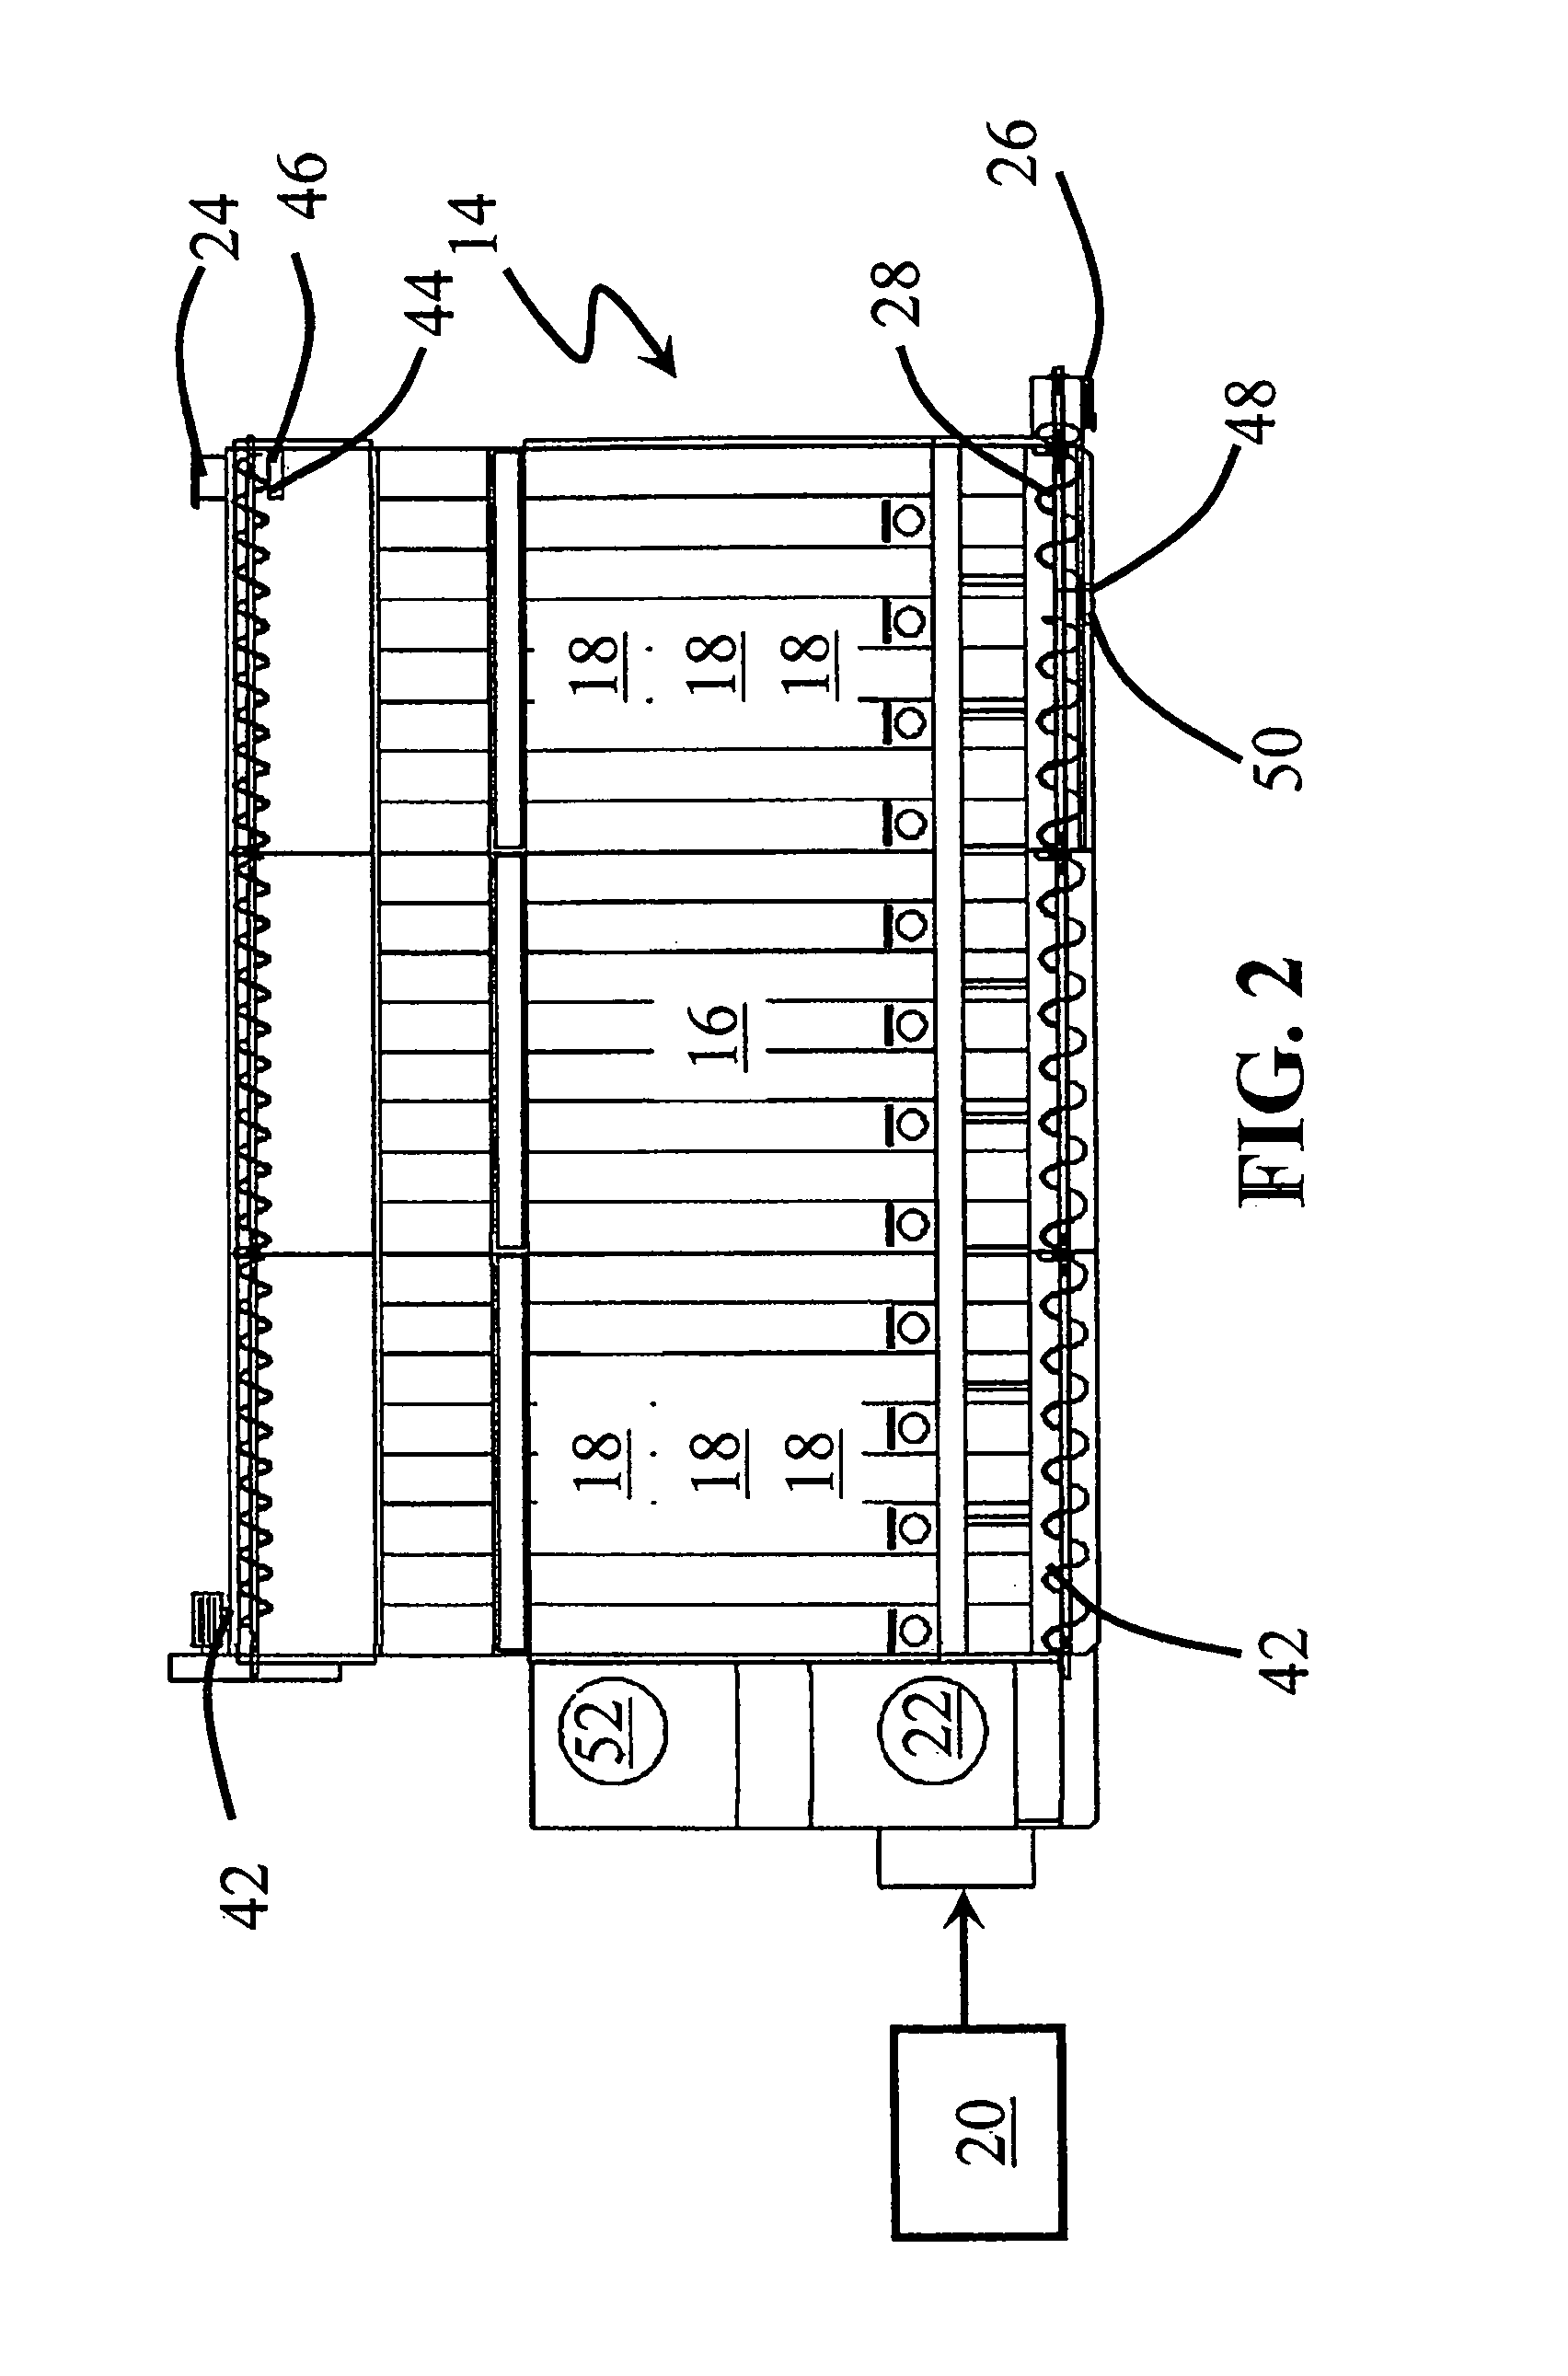 Apparatus and method for reducing a moisture content of an agricultural product